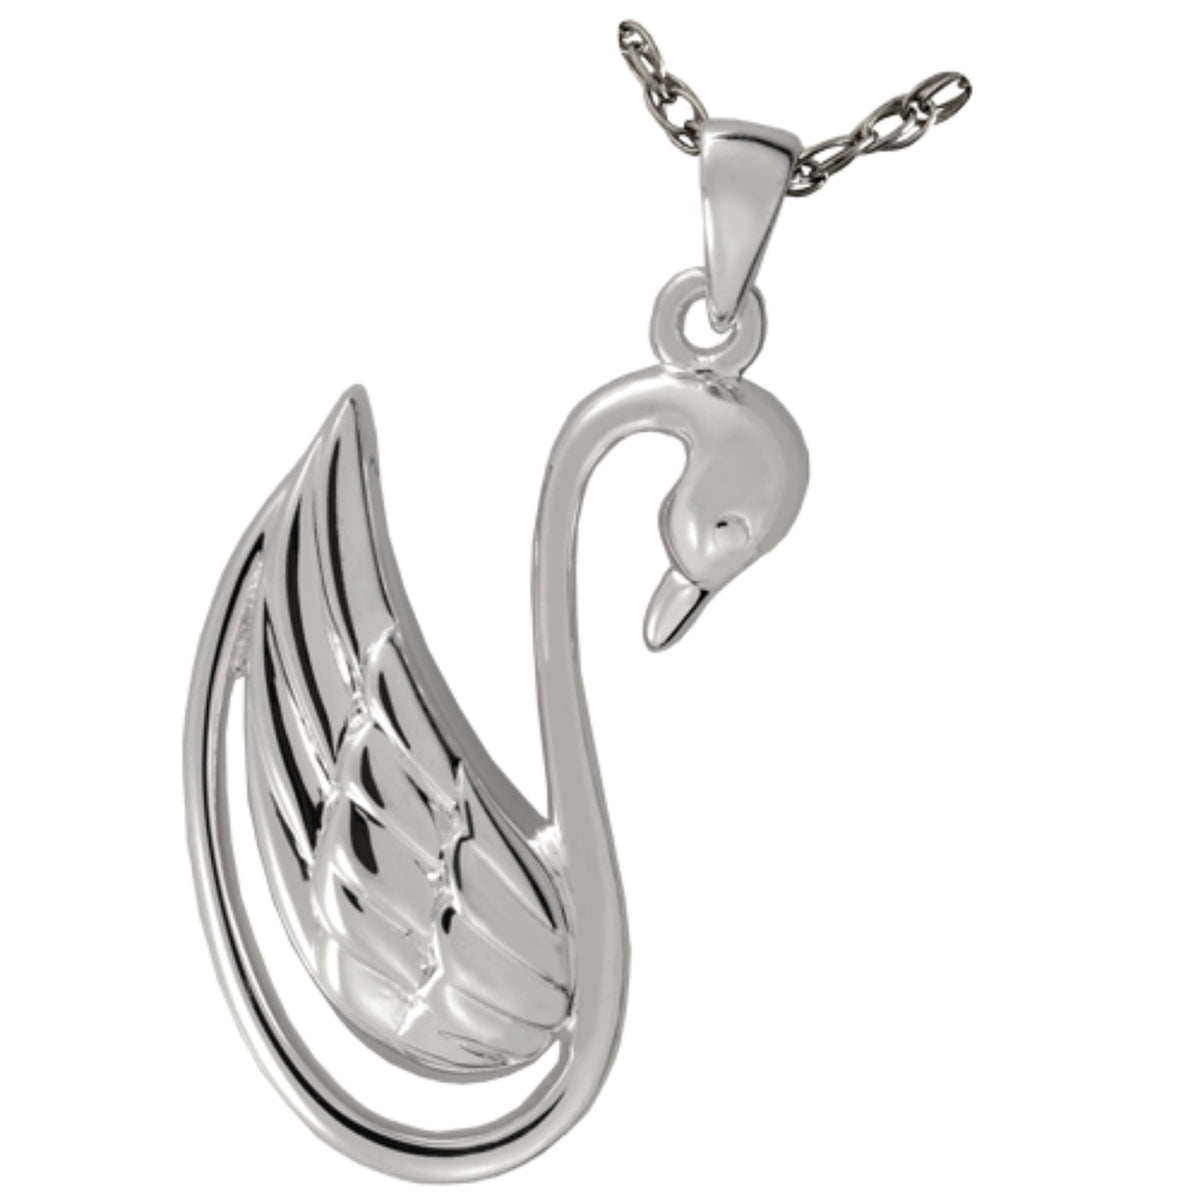 Kensington Swan Cremation Ashes Pendant 925 Silver NMD